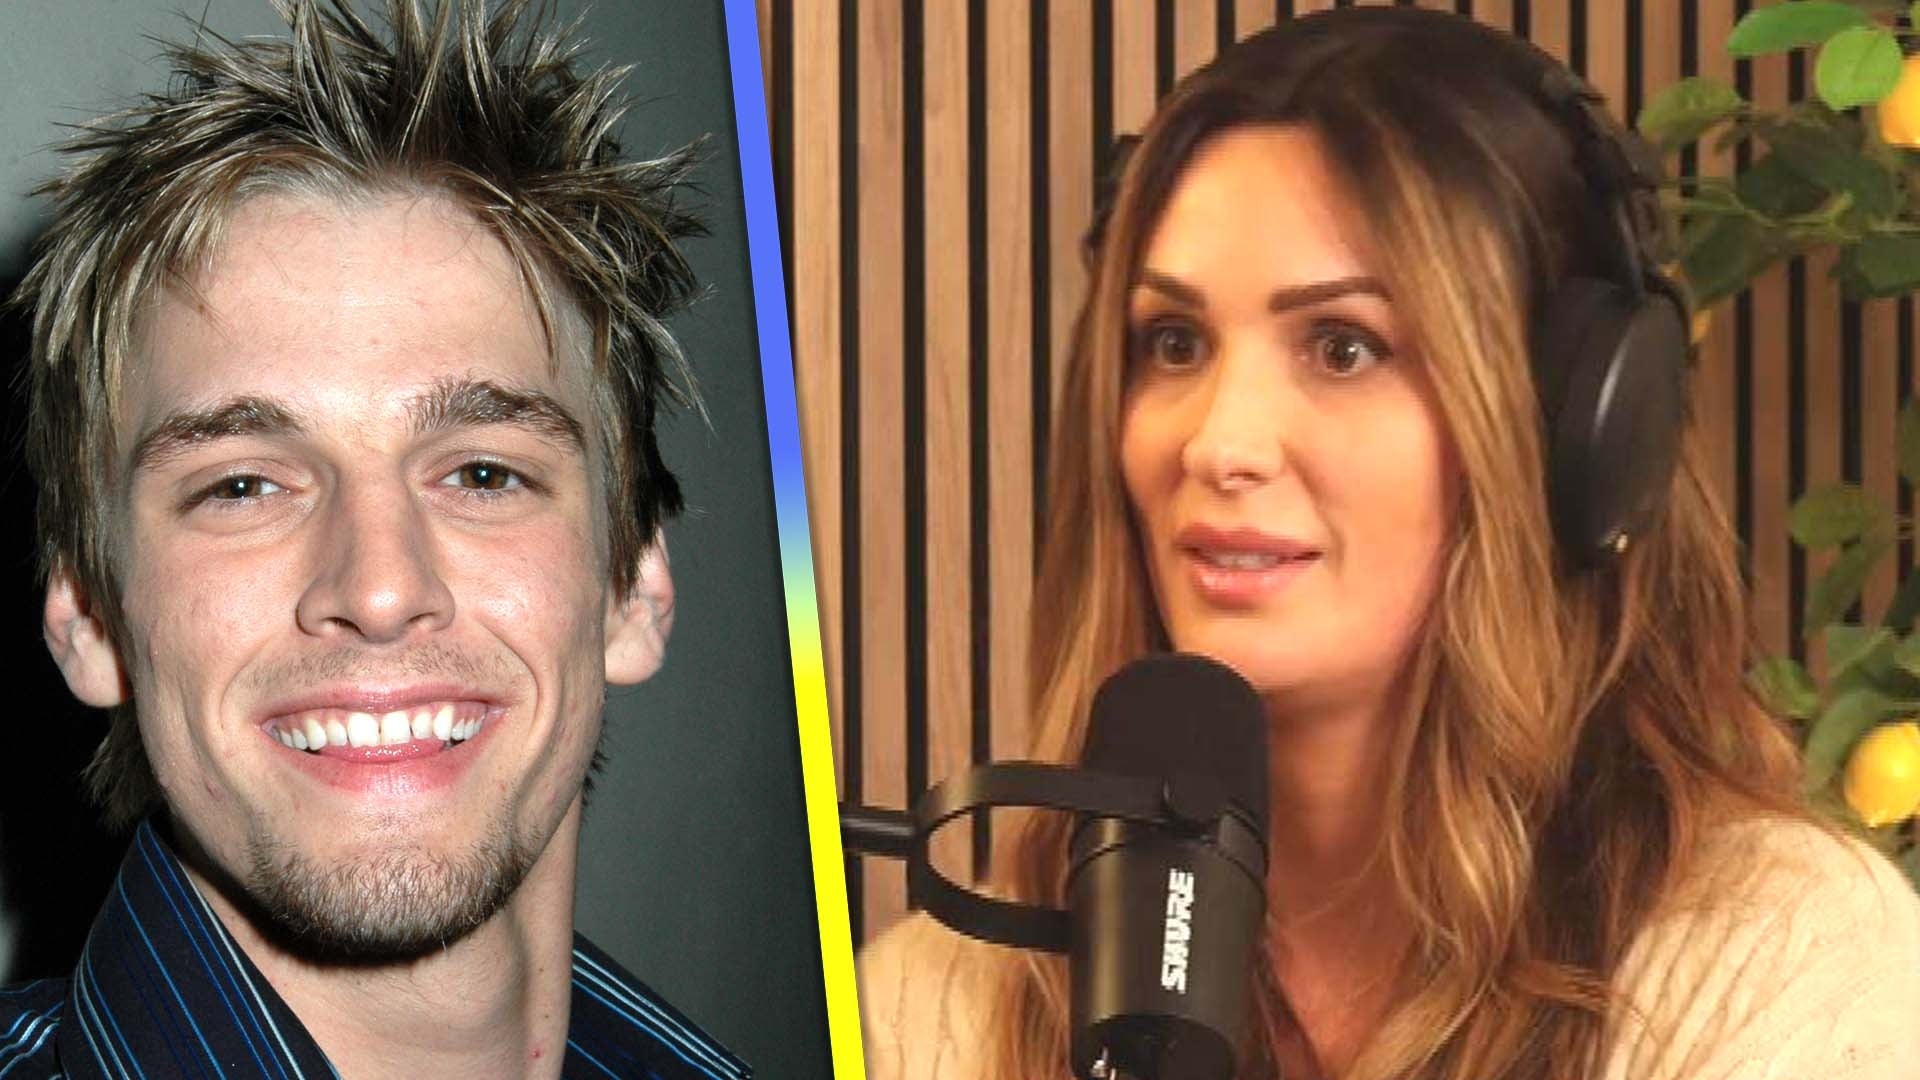 Aaron Carter's Twin Sister Angel Carter Conrad Says She Spent Years In Therapy Preparing for His Death  